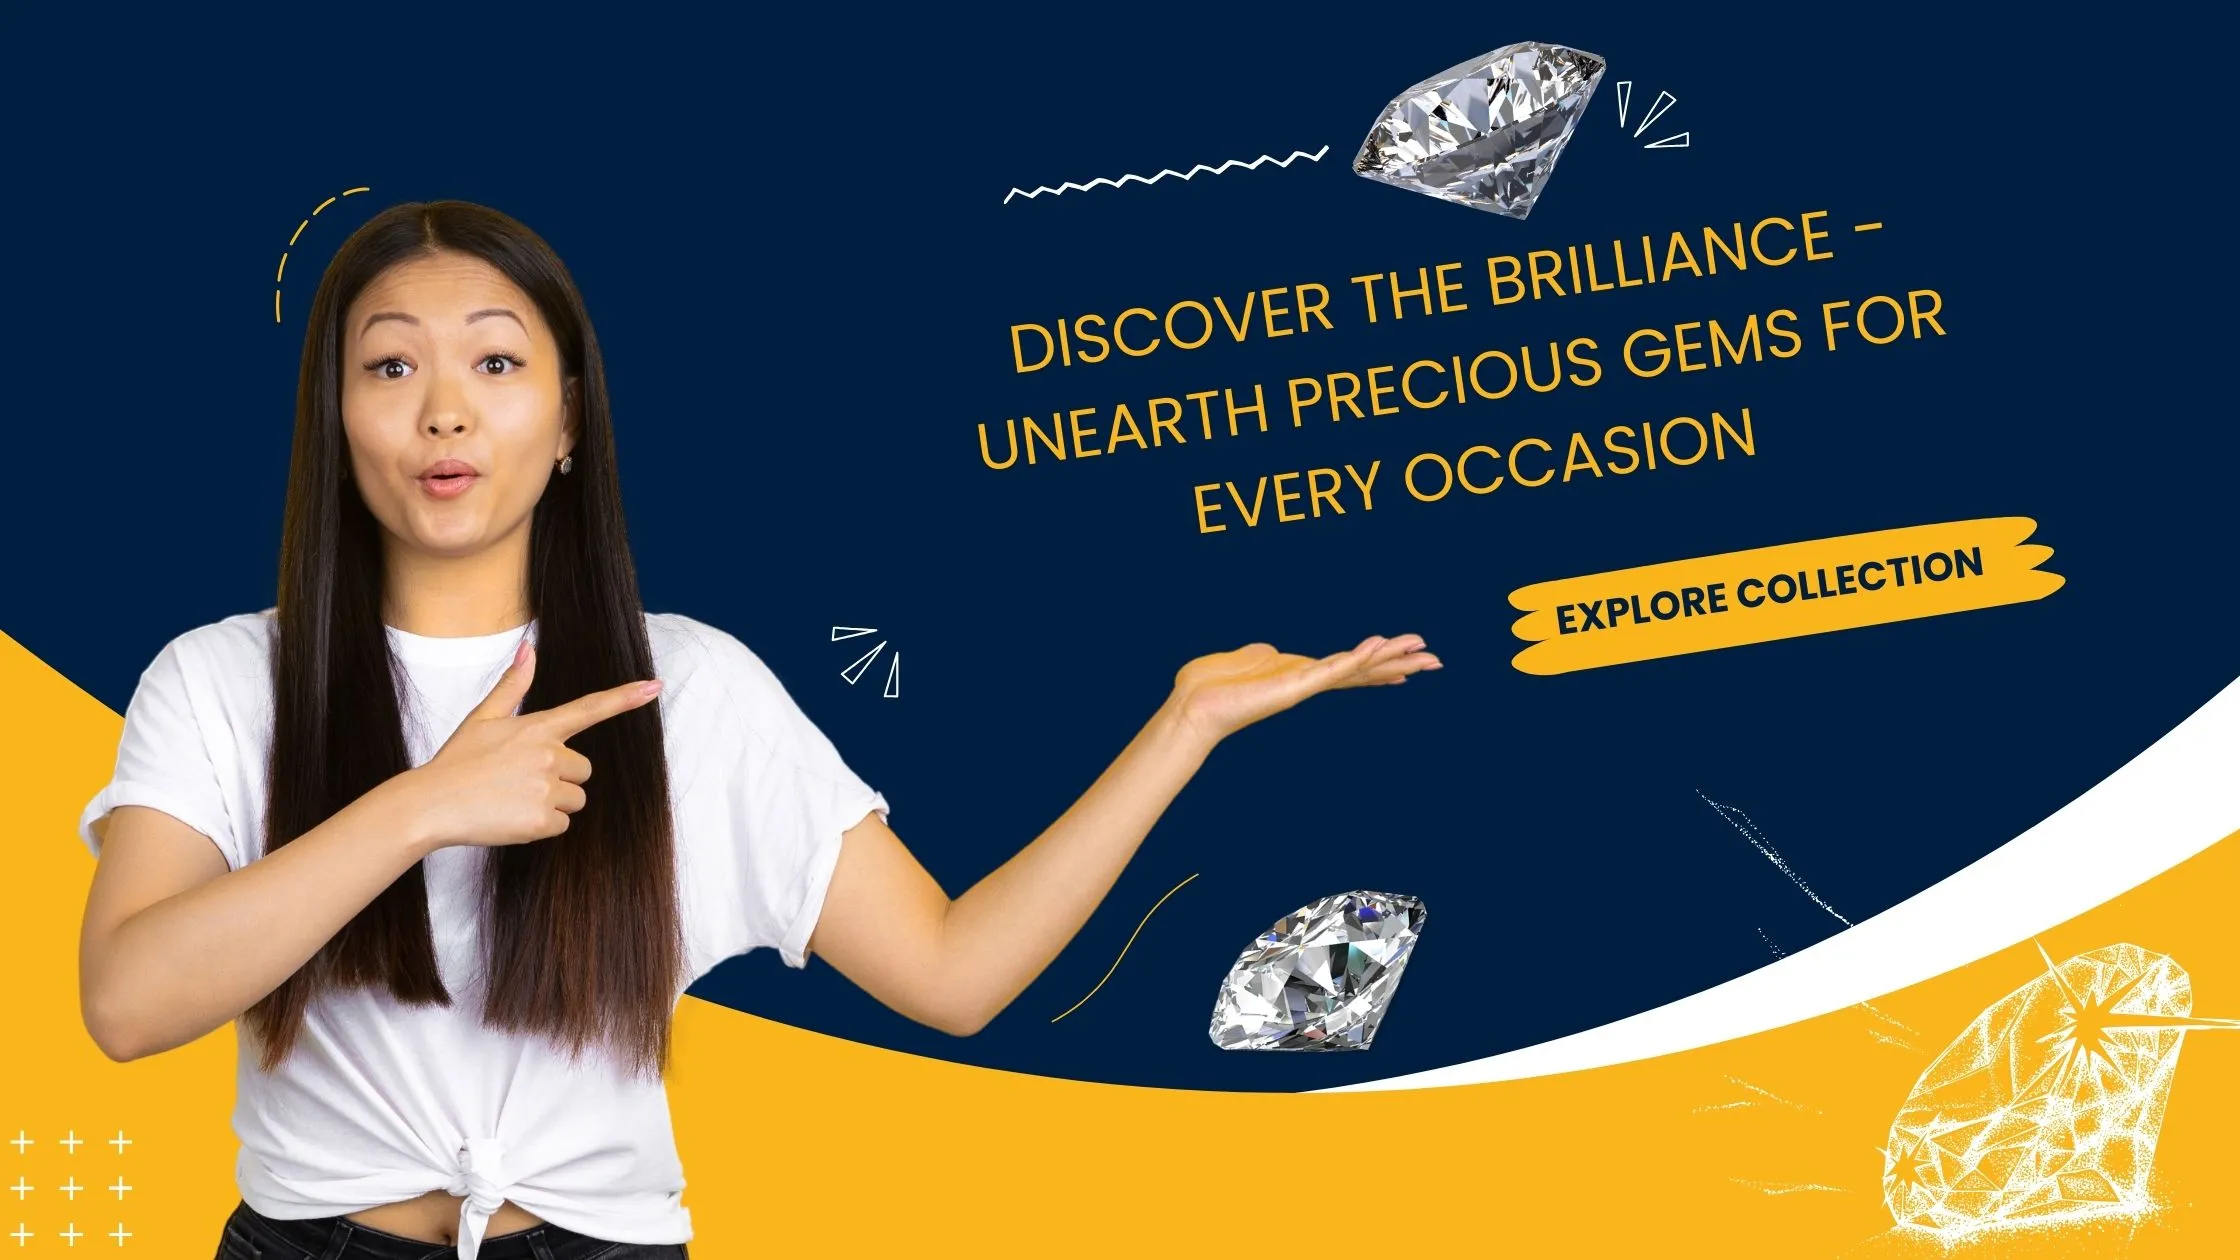 A vibrant promotional banner featuring a woman with a gesture of revelation towards the text 'DISCOVER THE BRILLIANCE - UNEARTH PRECIOUS GEMS FOR EVERY OCCASION.' The background is split between a deep blue and bright yellow, with illustrative graphics of sparkling diamonds. An 'EXPLORE COLLECTION' call-to-action button encourages viewers to browse the gem selection.